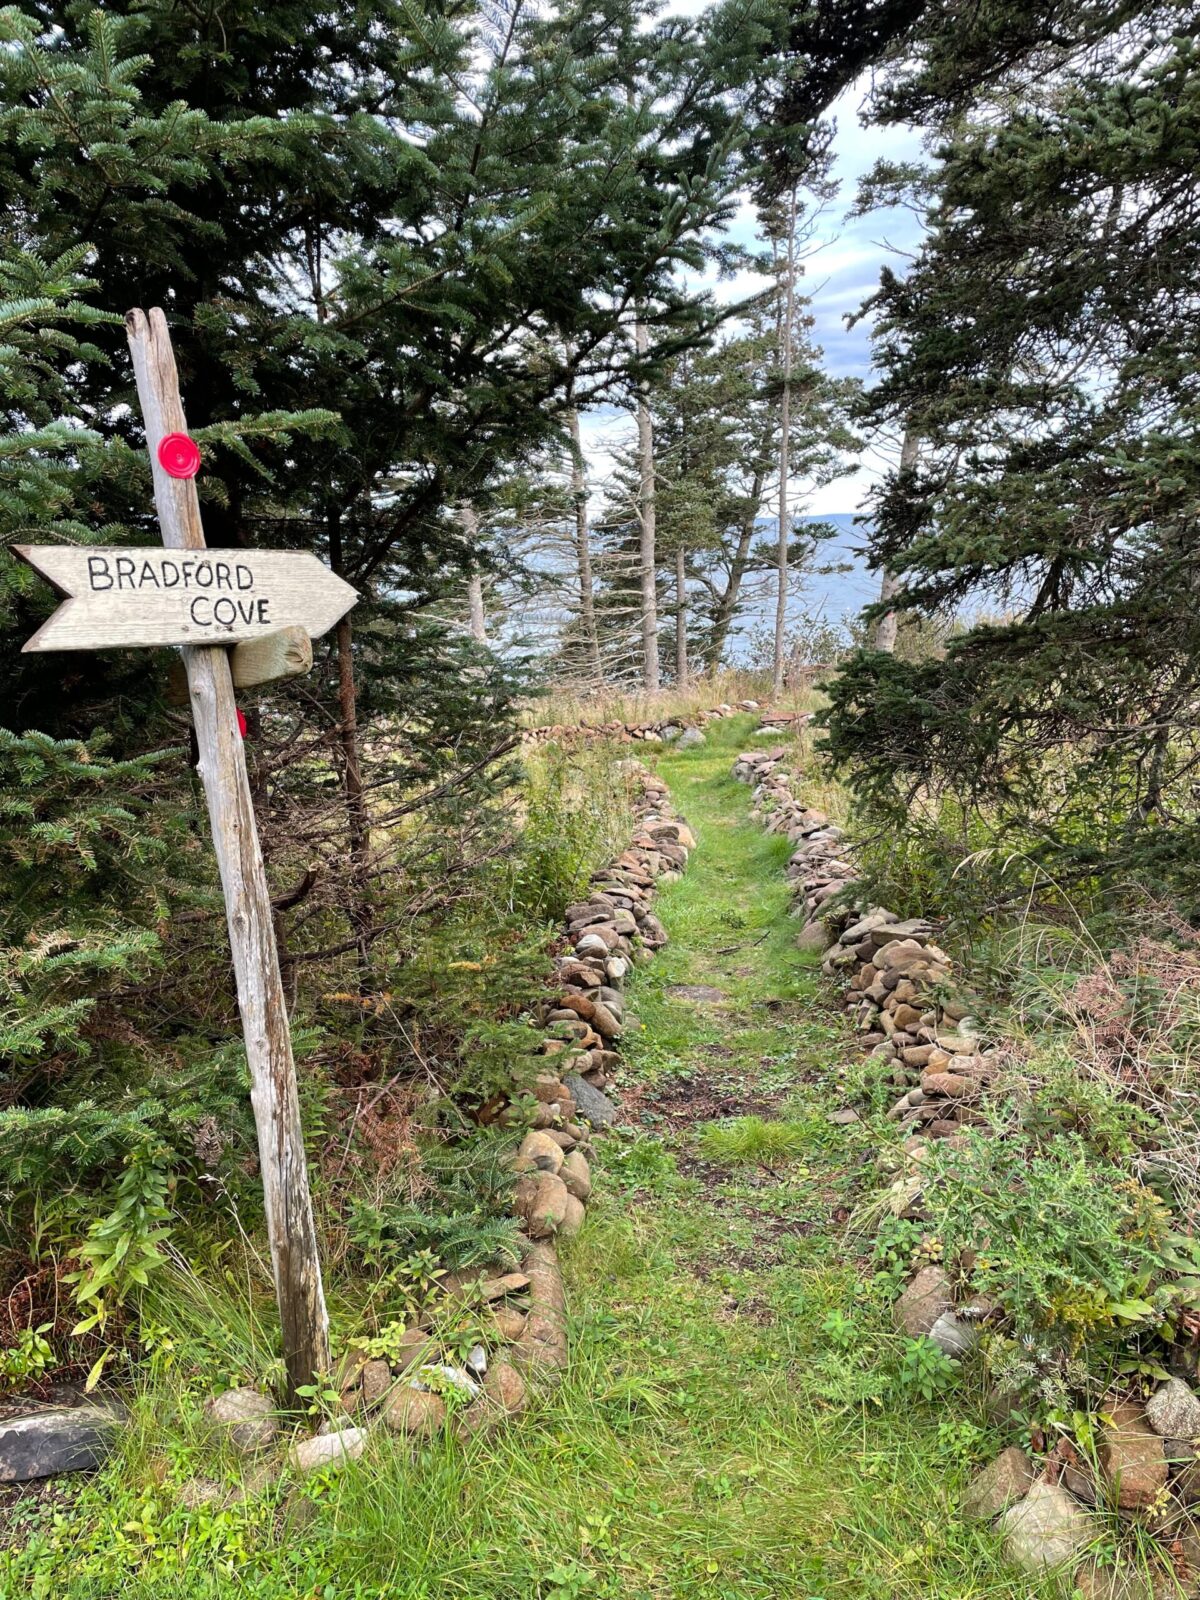 A sign pointing to a trail in the woods.